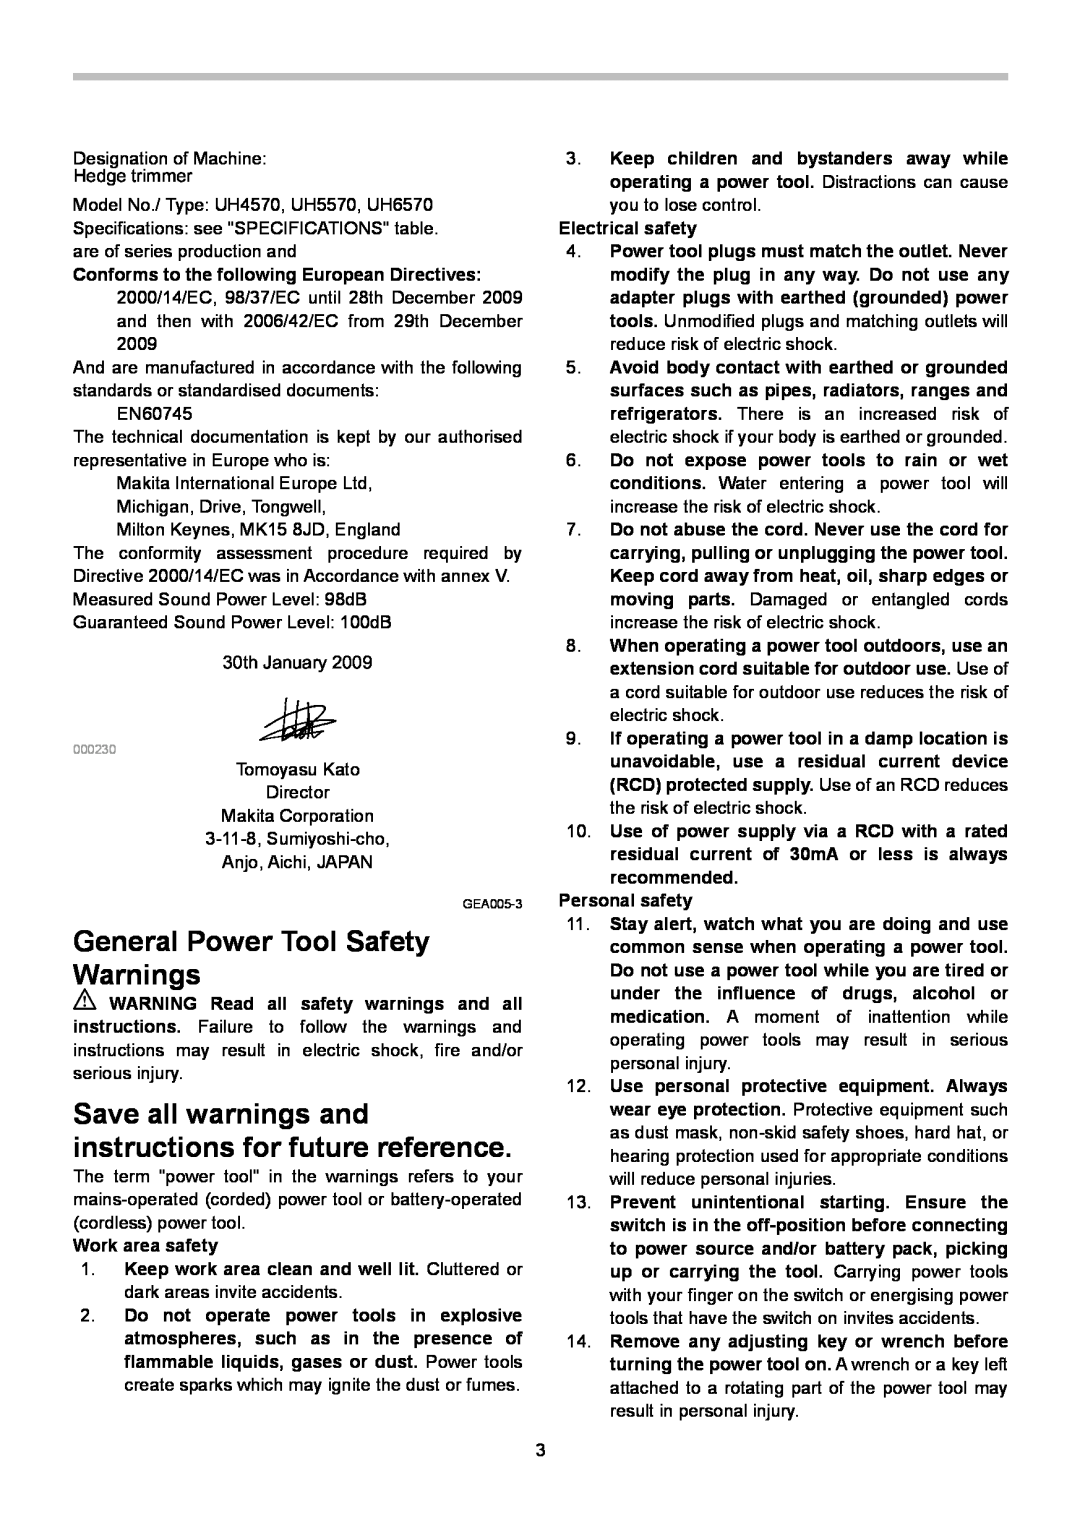 Makita UH6570, UH5570, UH4570 General Power Tool Safety Warnings, Save all warnings and instructions for future reference 